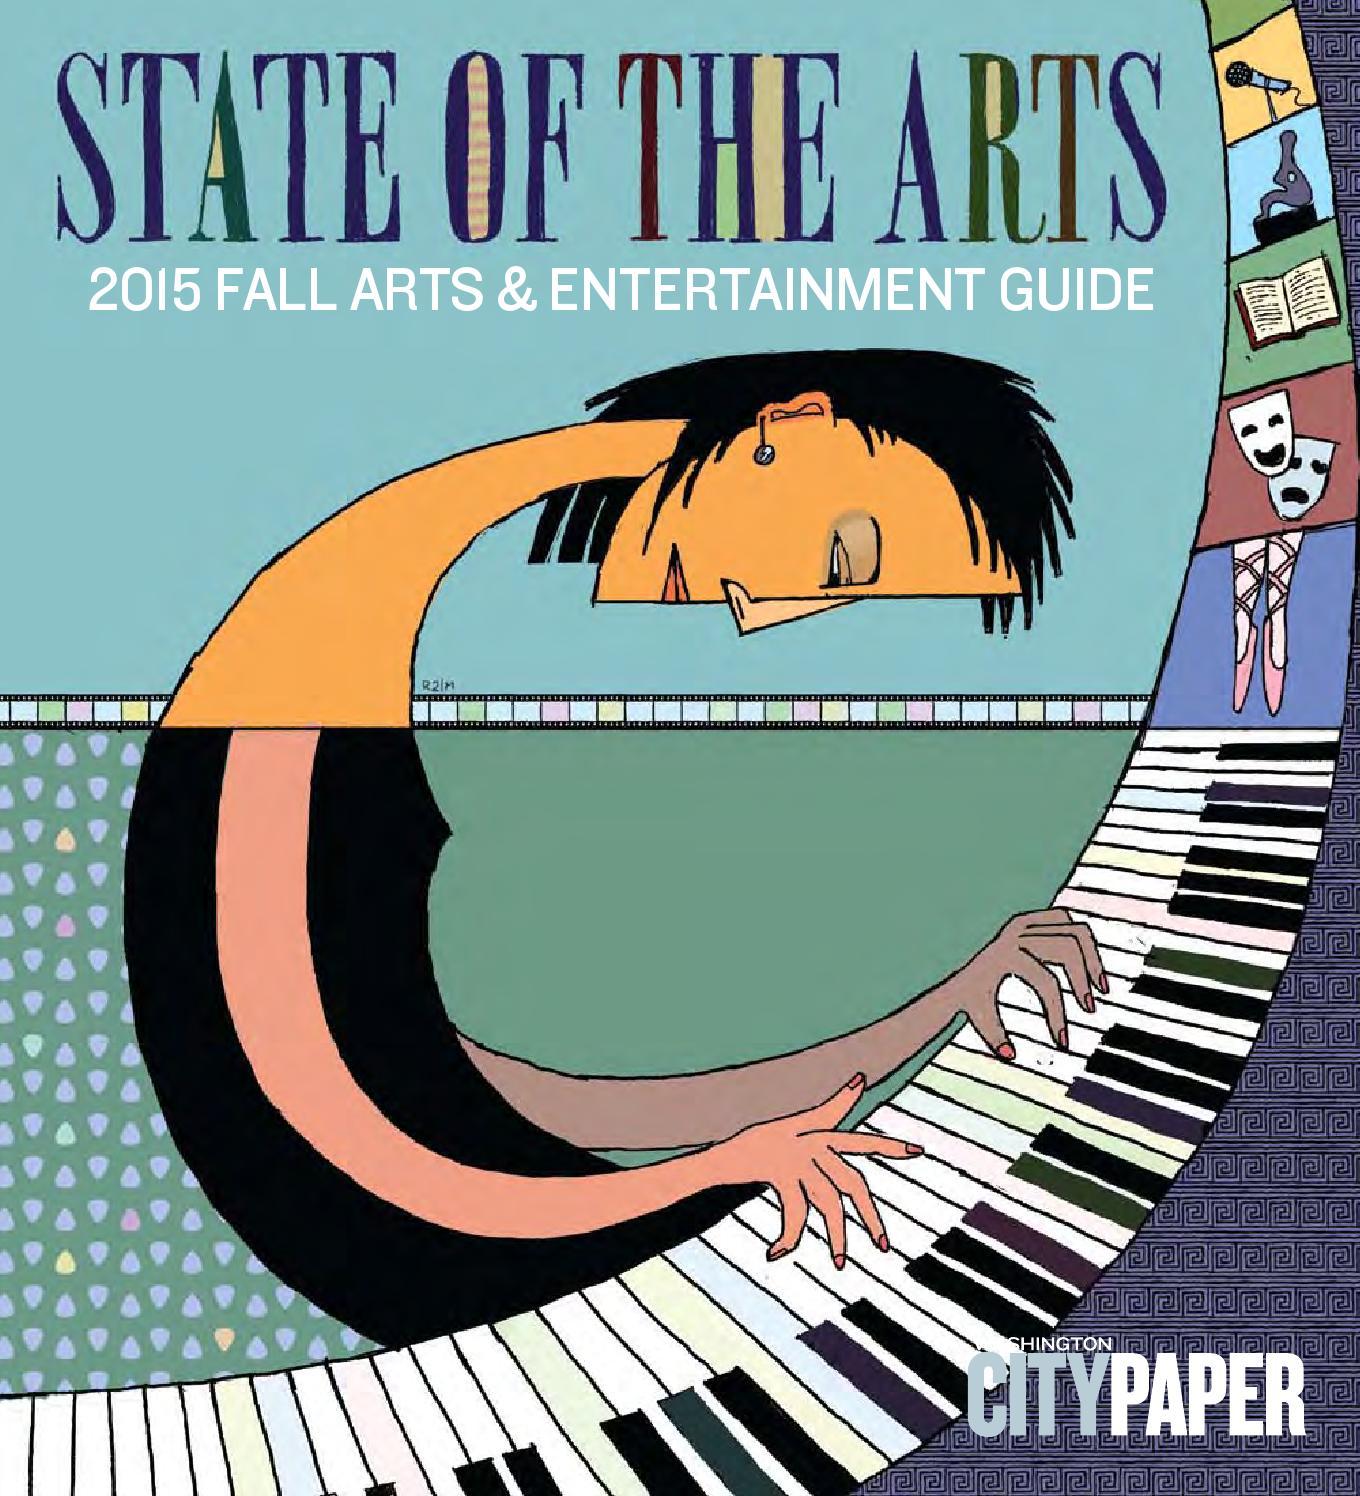 2015 Fall Arts & Entertainment Guide by Washington City Paper - Issuu